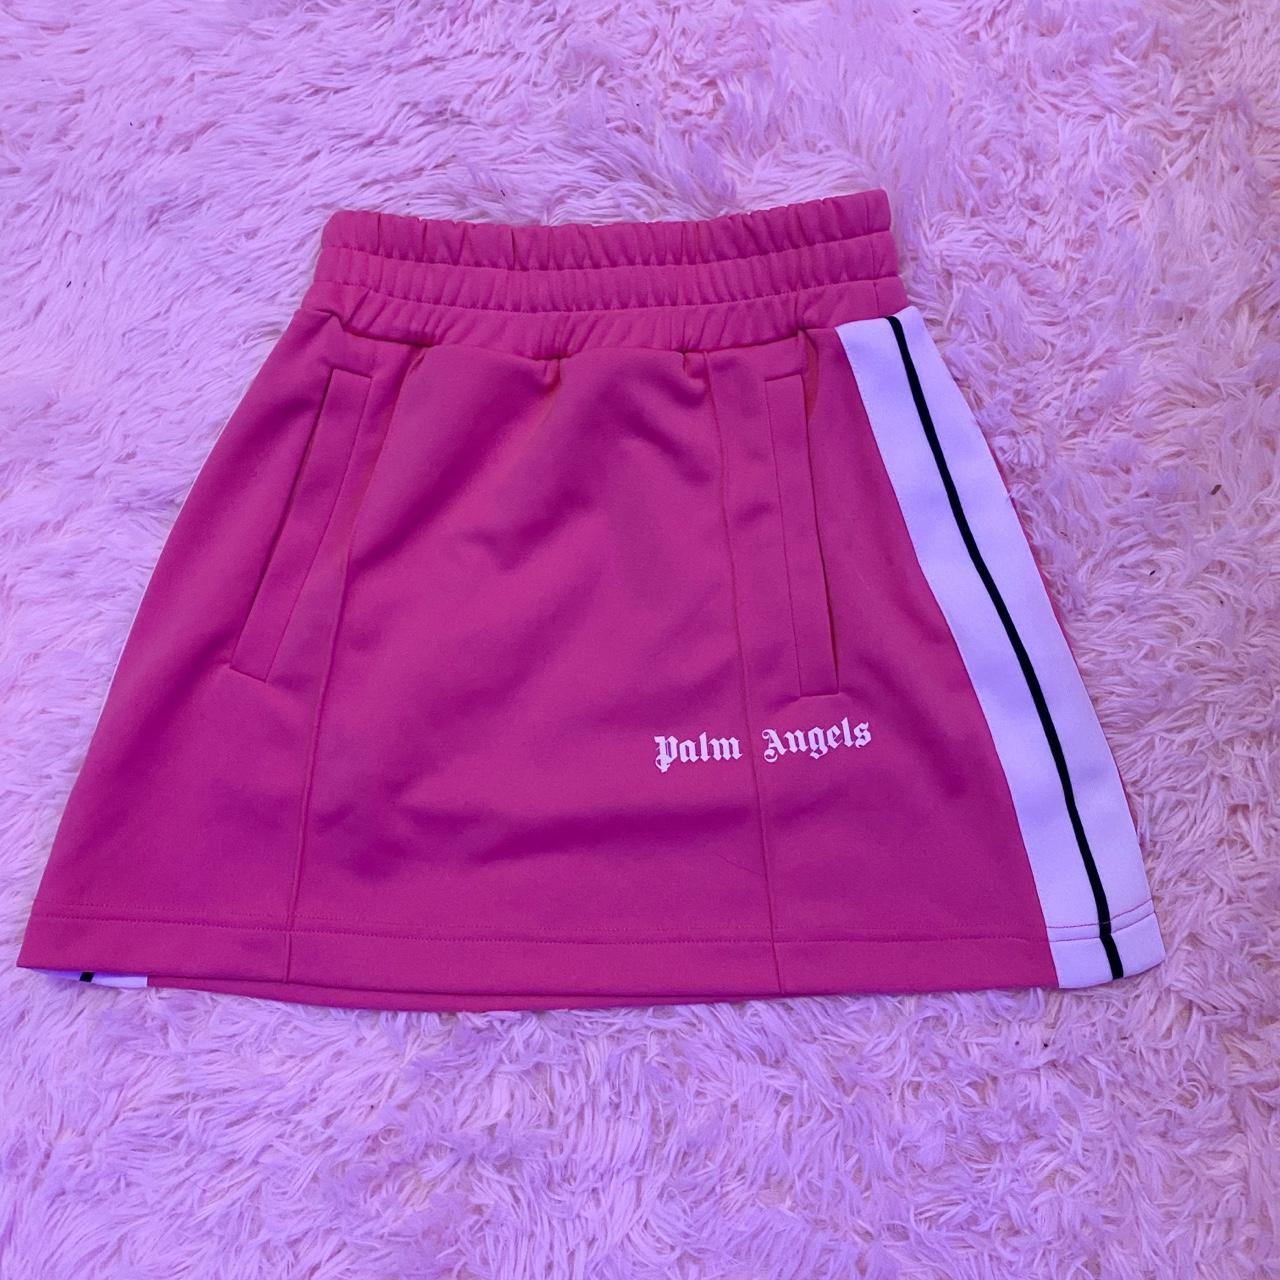 Palm Angels Women's Pink and White Skirt